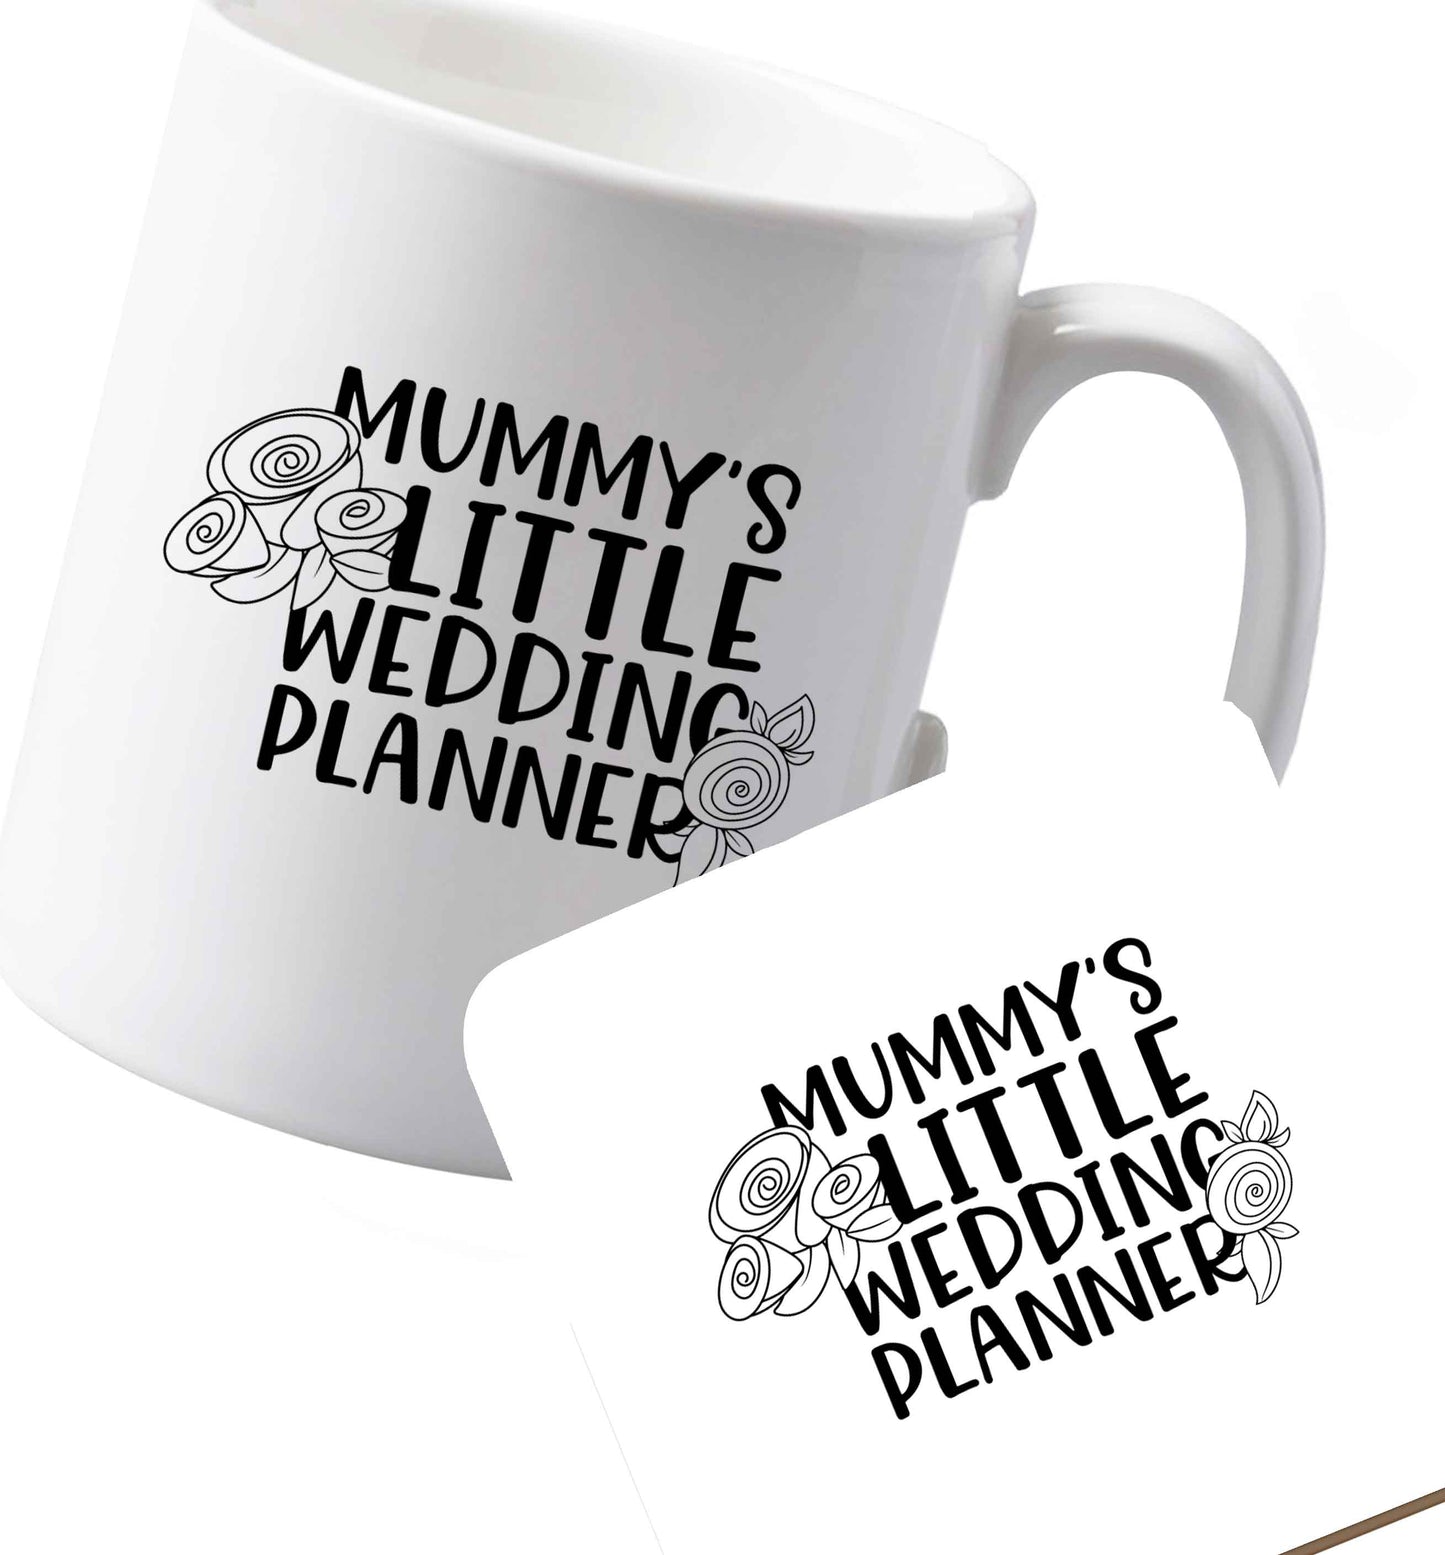 10 oz Ceramic mug and coaster adorable wedding themed gifts for your mini wedding planner!   both sides